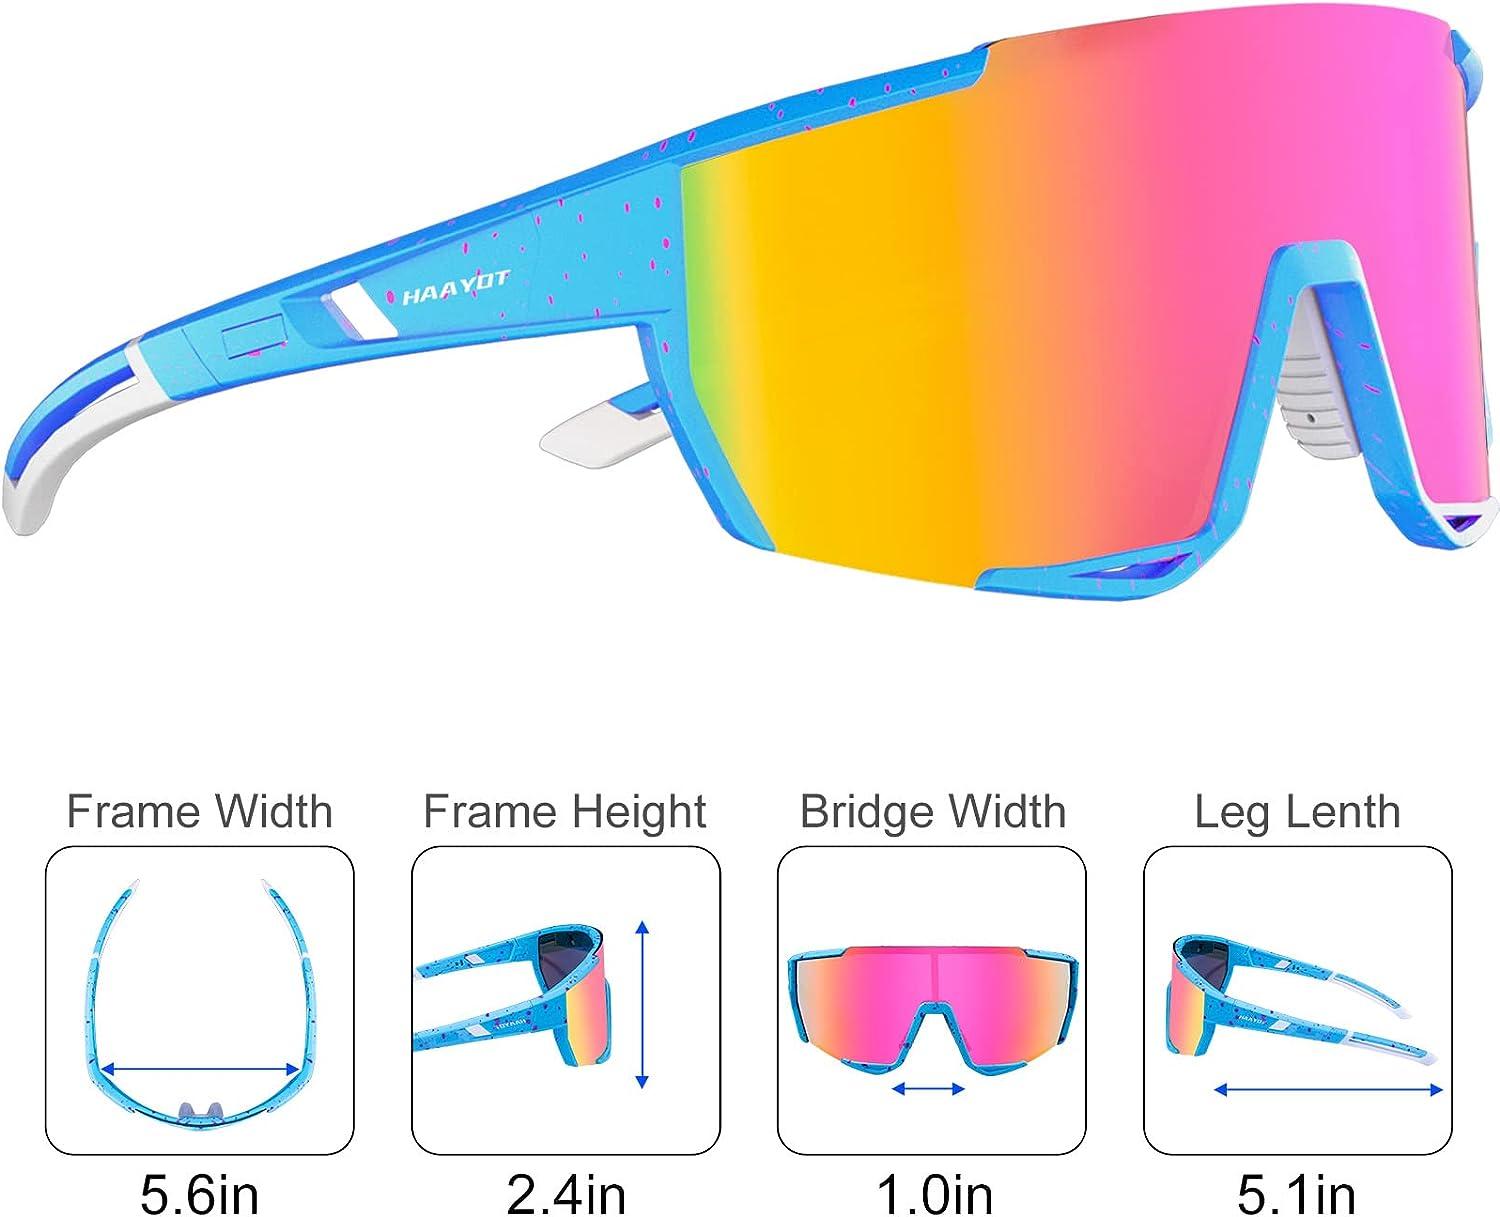 HAAYOT Polarized Cycling Glasses,Sports Sunglasses for Men Women